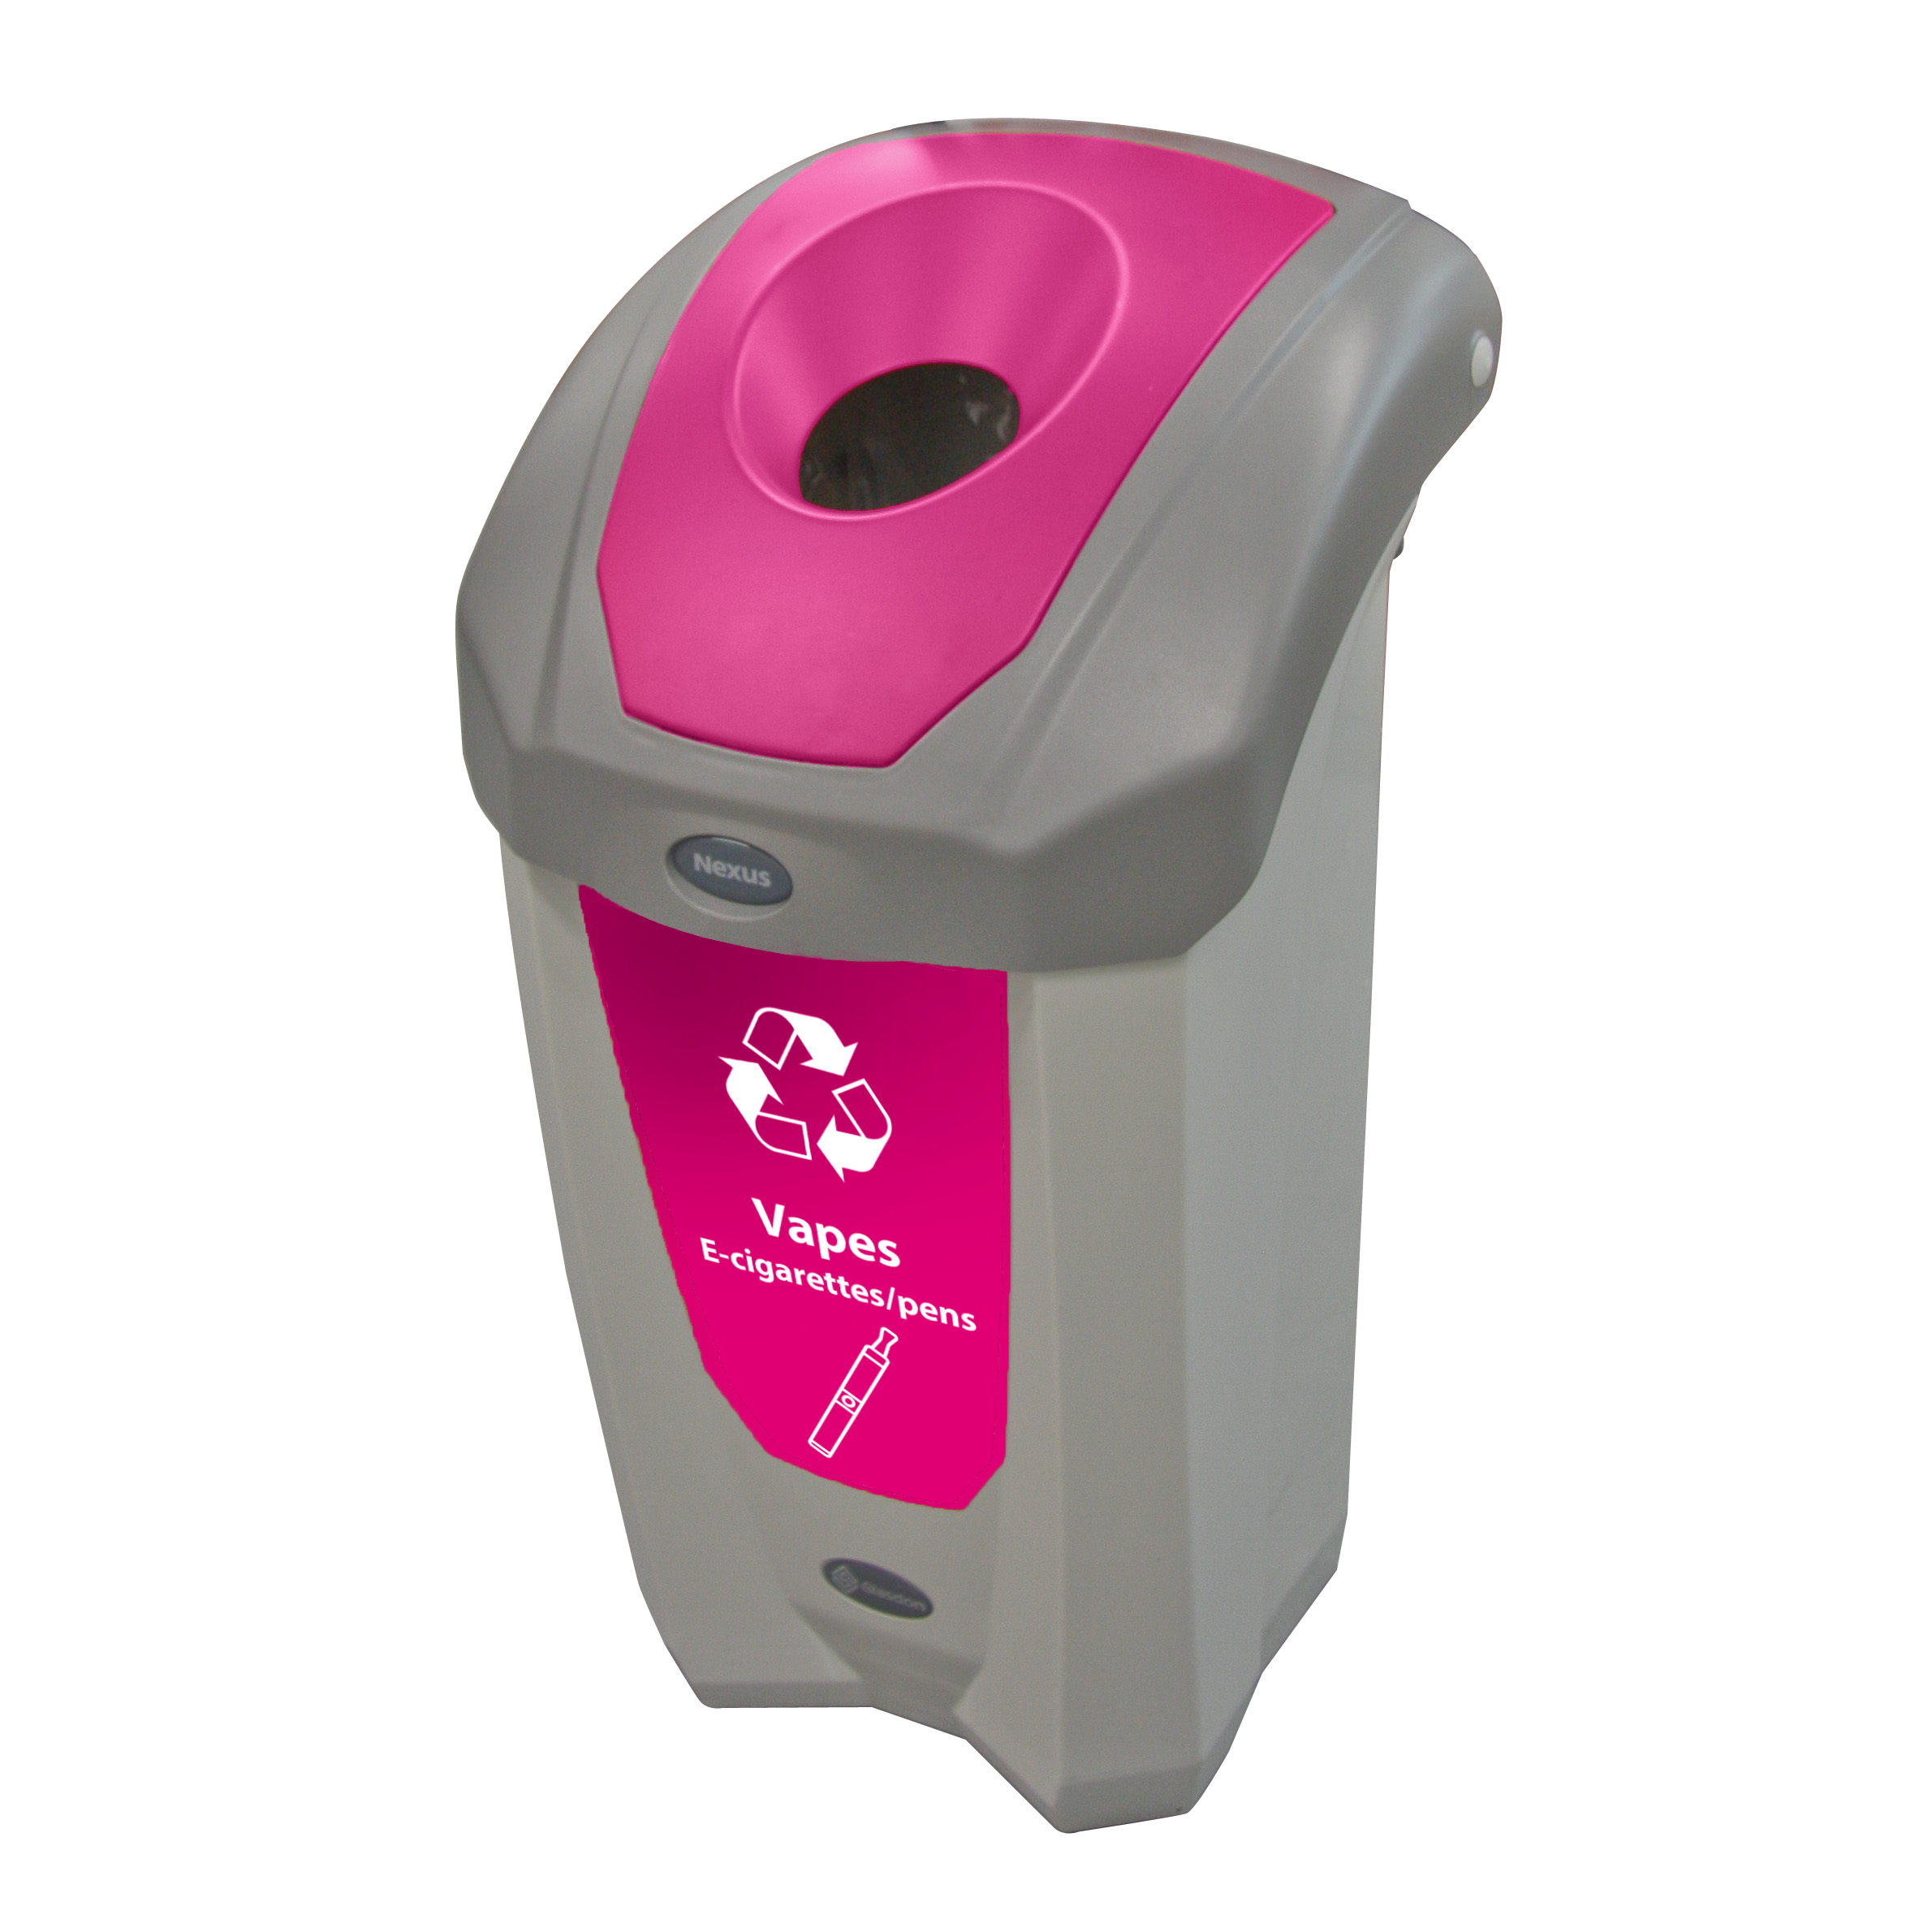 Nexus® 8G Vape Recycling Bin with Express Shipping Gray Body with Magenta Cans & Bottle Aperture & Vape Sticker